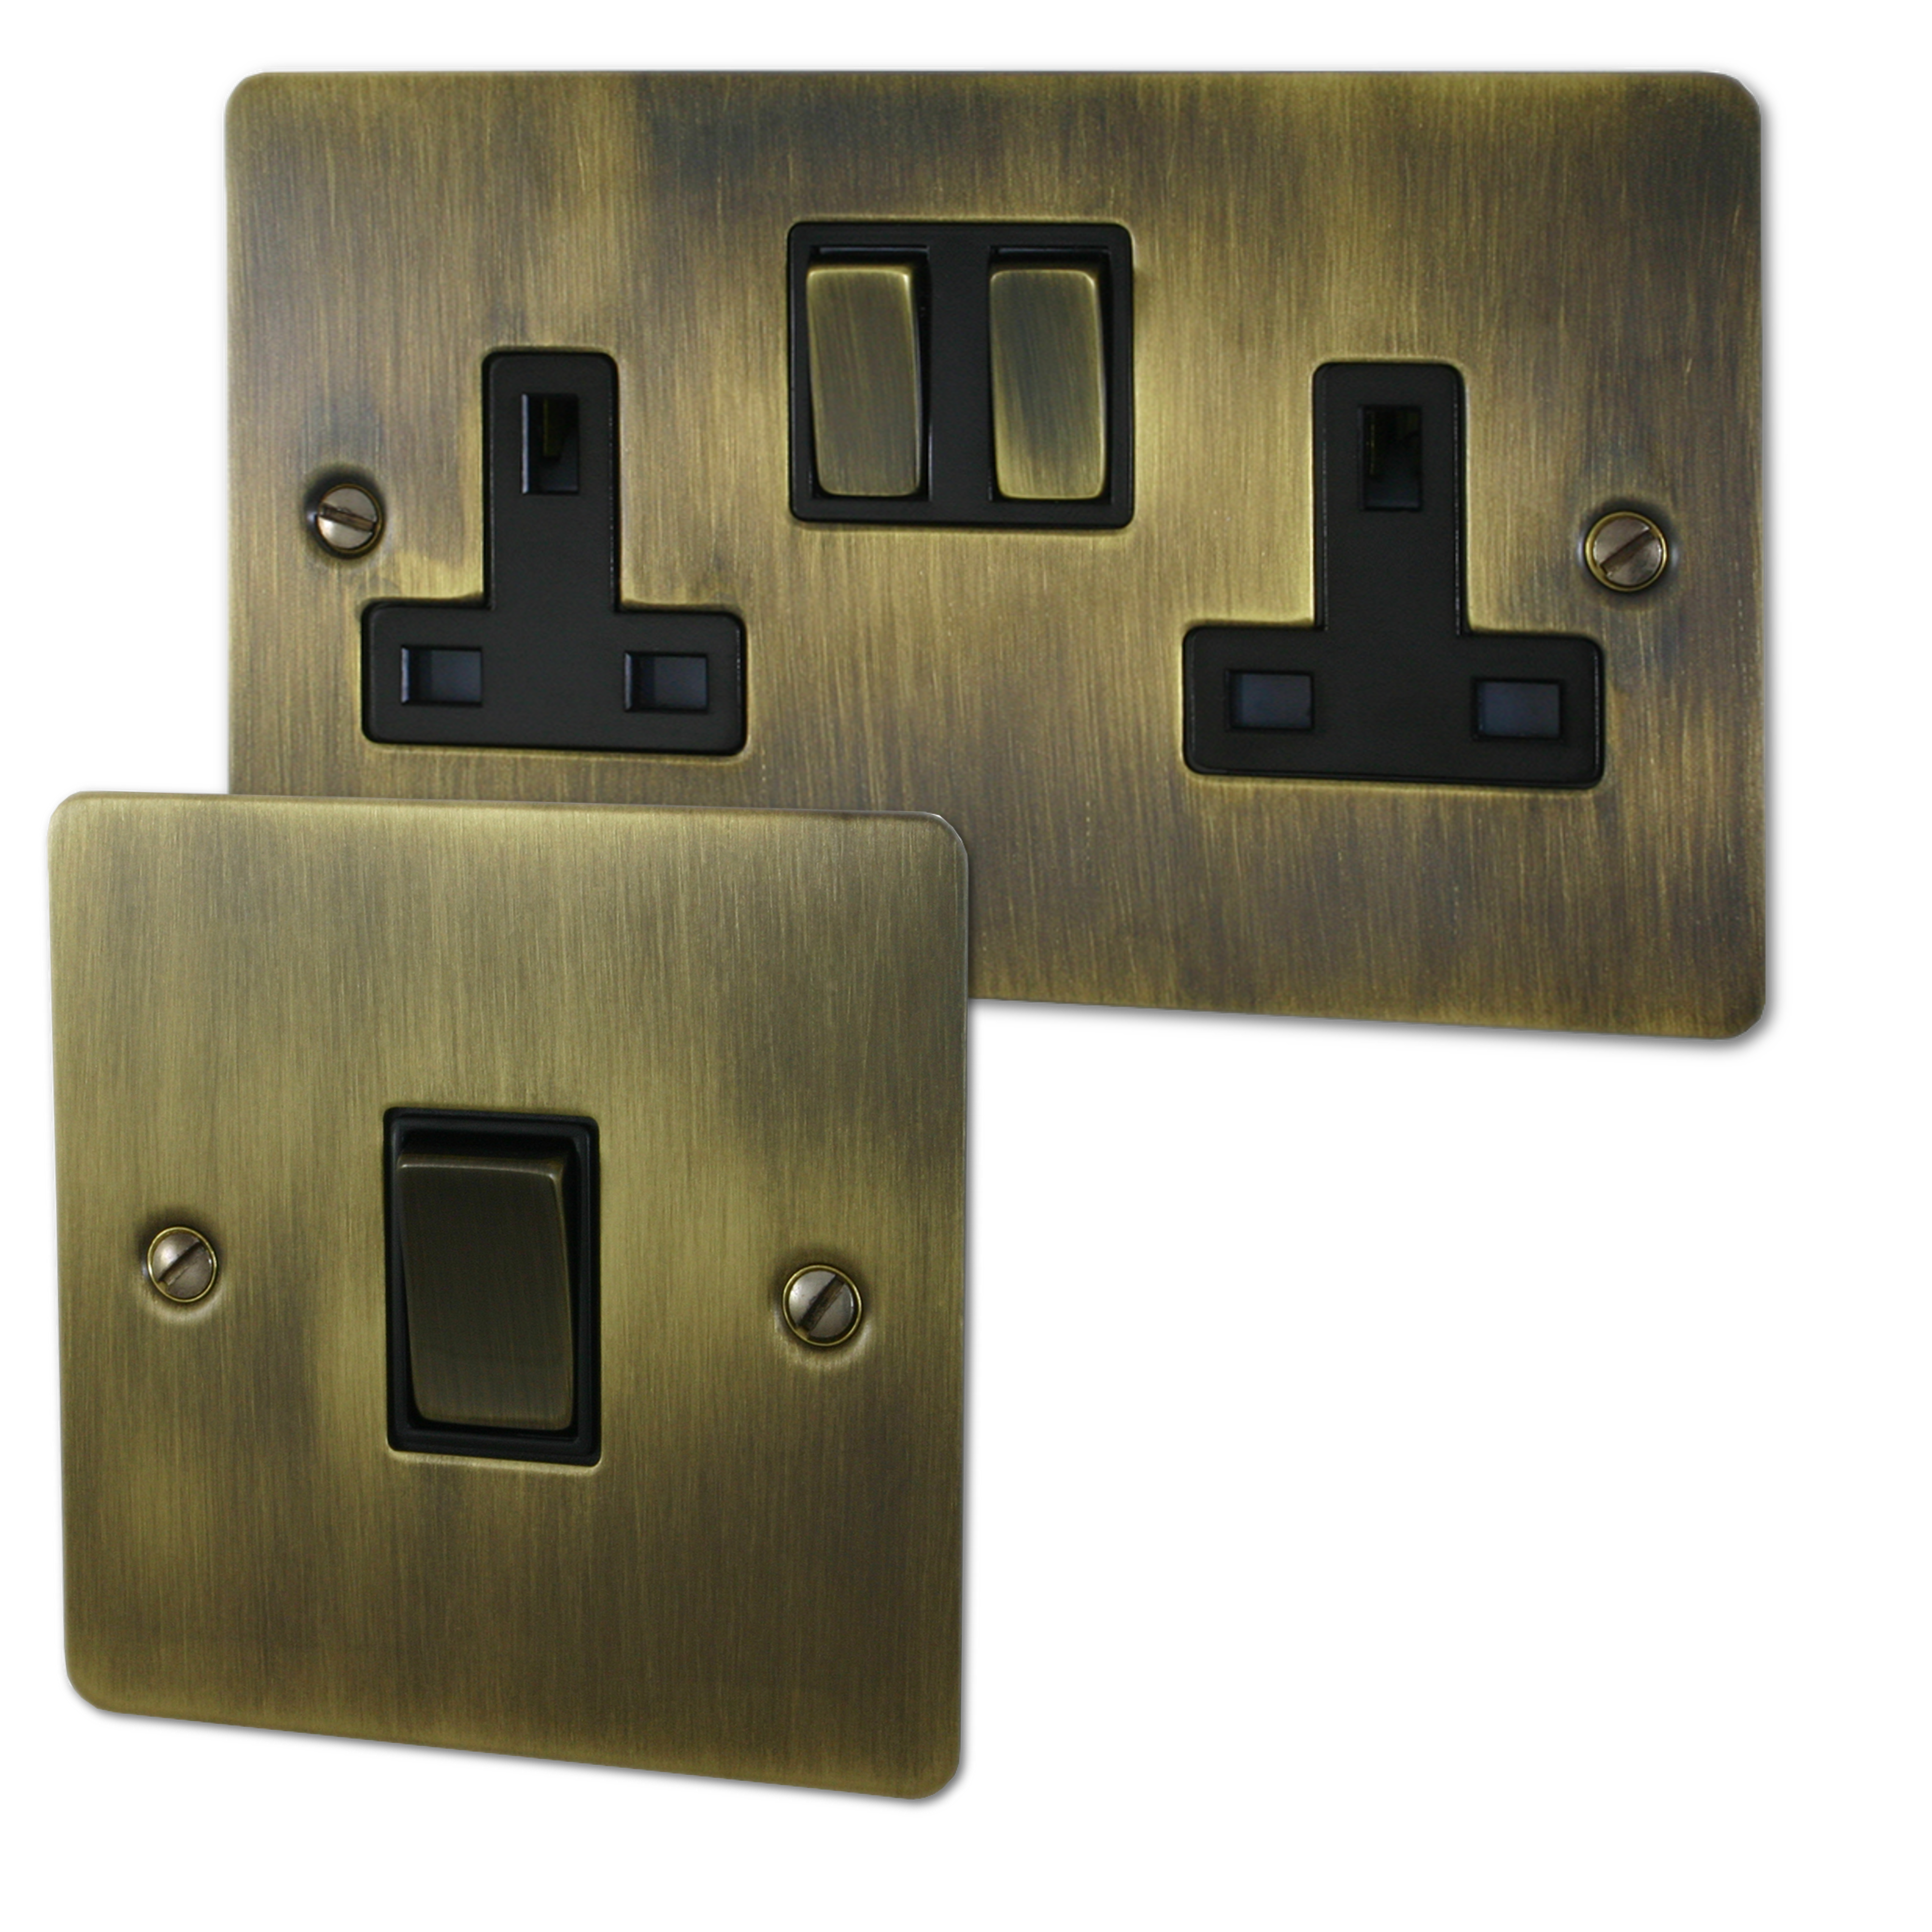 Flat Antique Brass Sockets and Switches from Socket Store